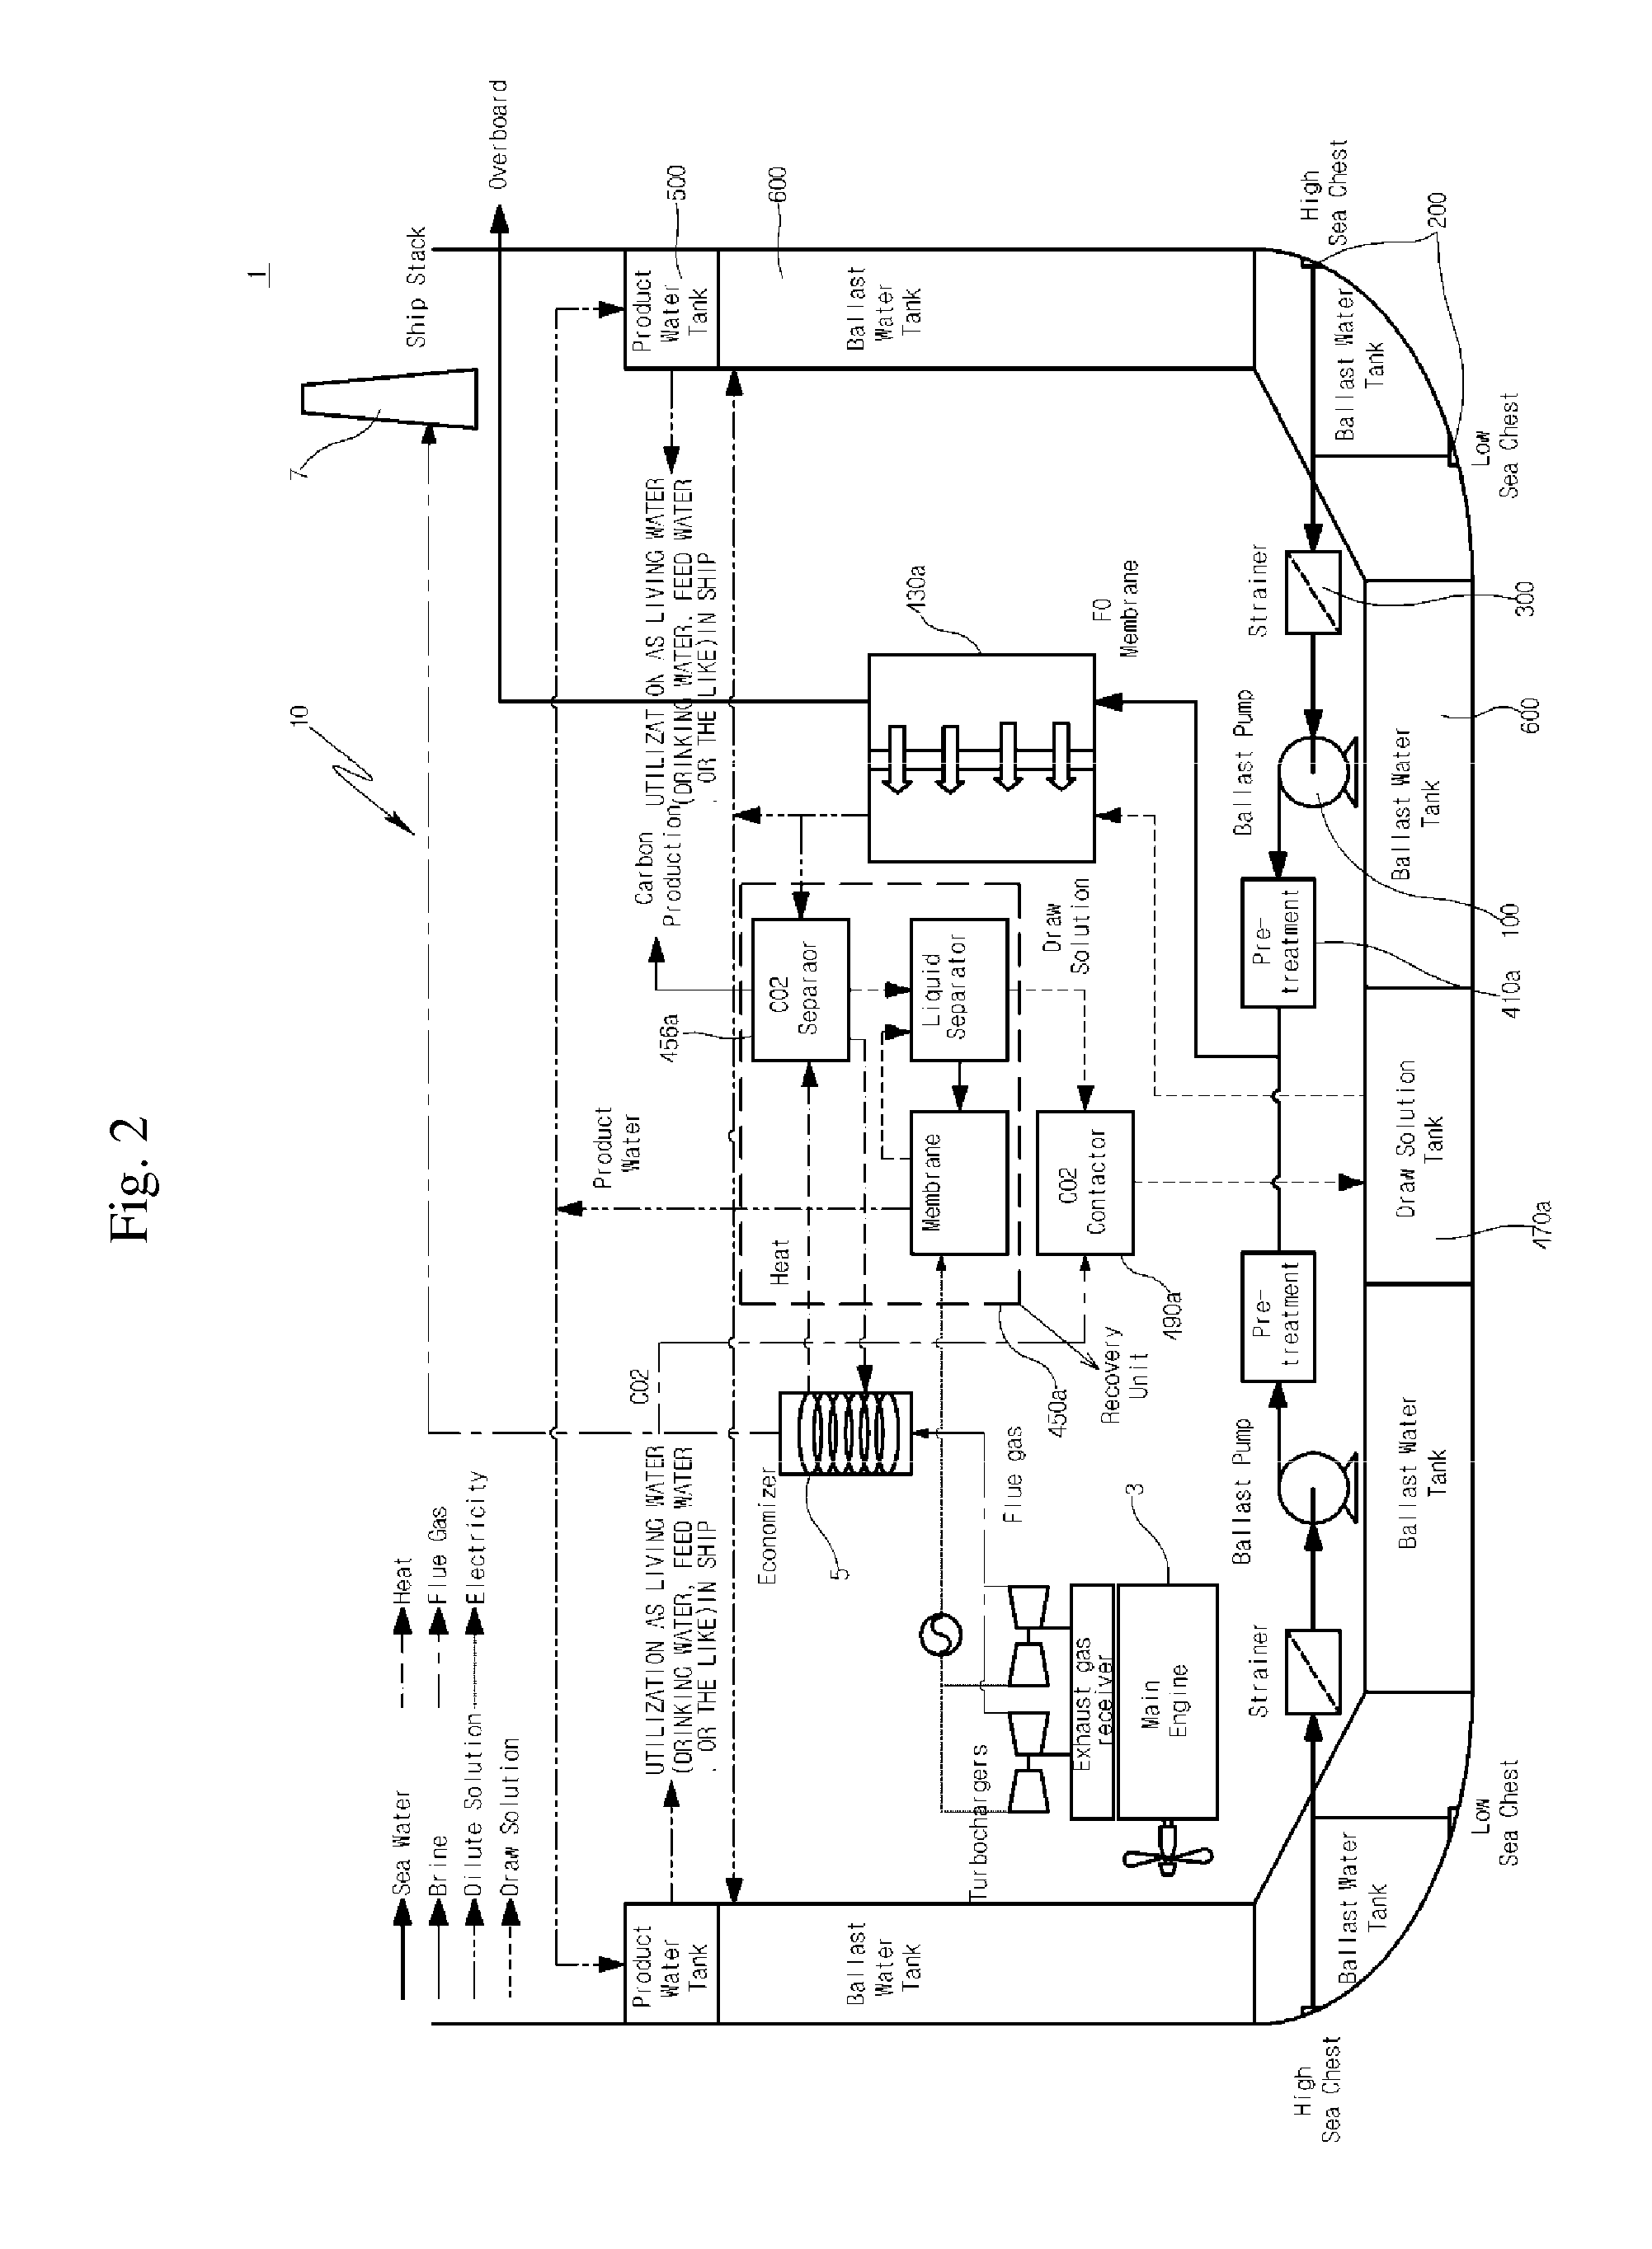 Ballast water treatment apparatus and method for ship using forward osmosis process